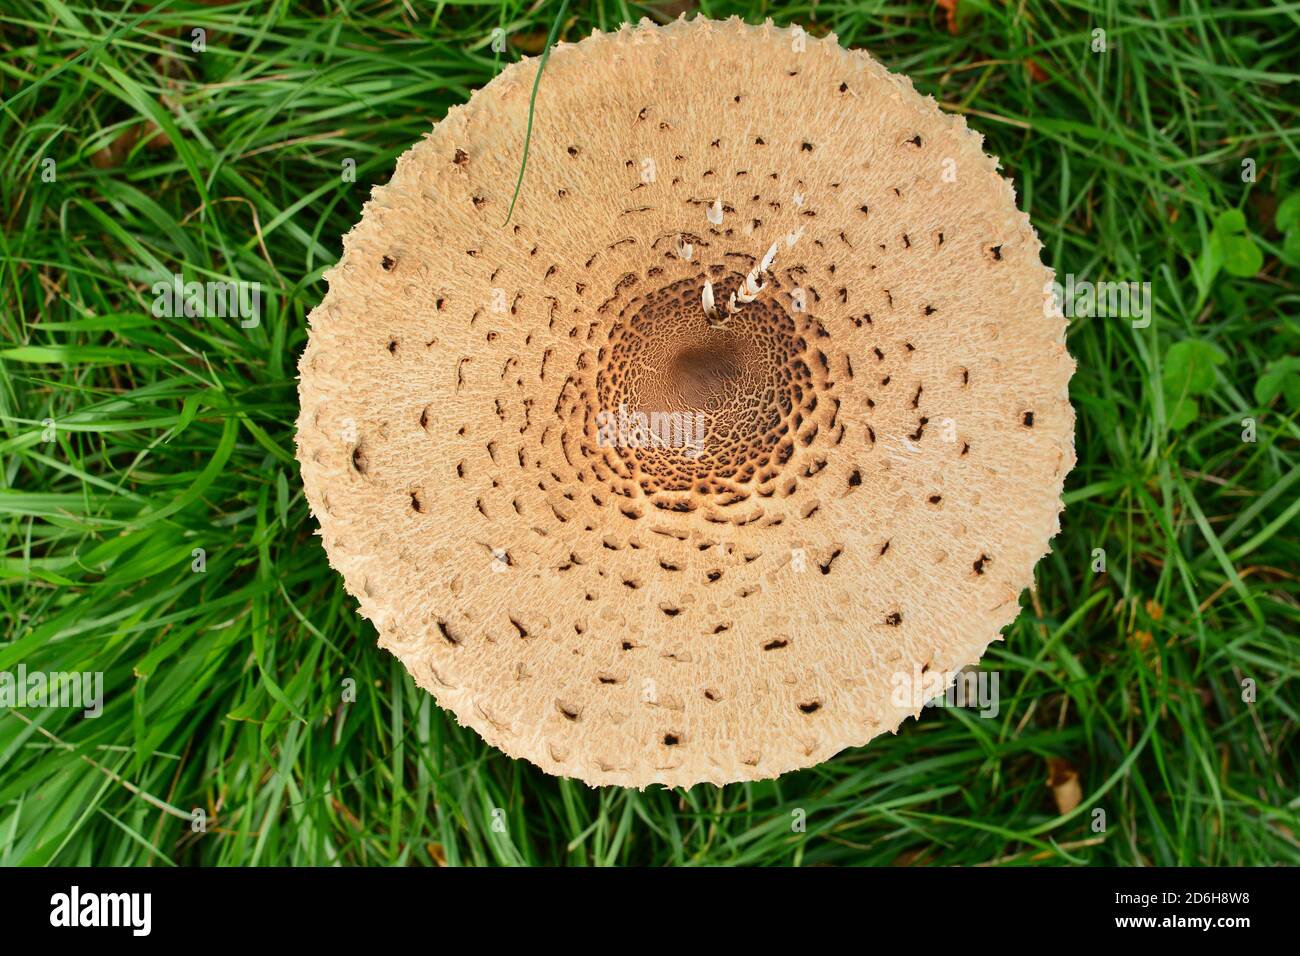 Bird's-eye view of a fully grown specimen of Macrolepiota procera mastoidea, commonly known as parasol mushroom, in a meadow in Italy. Stock Photo